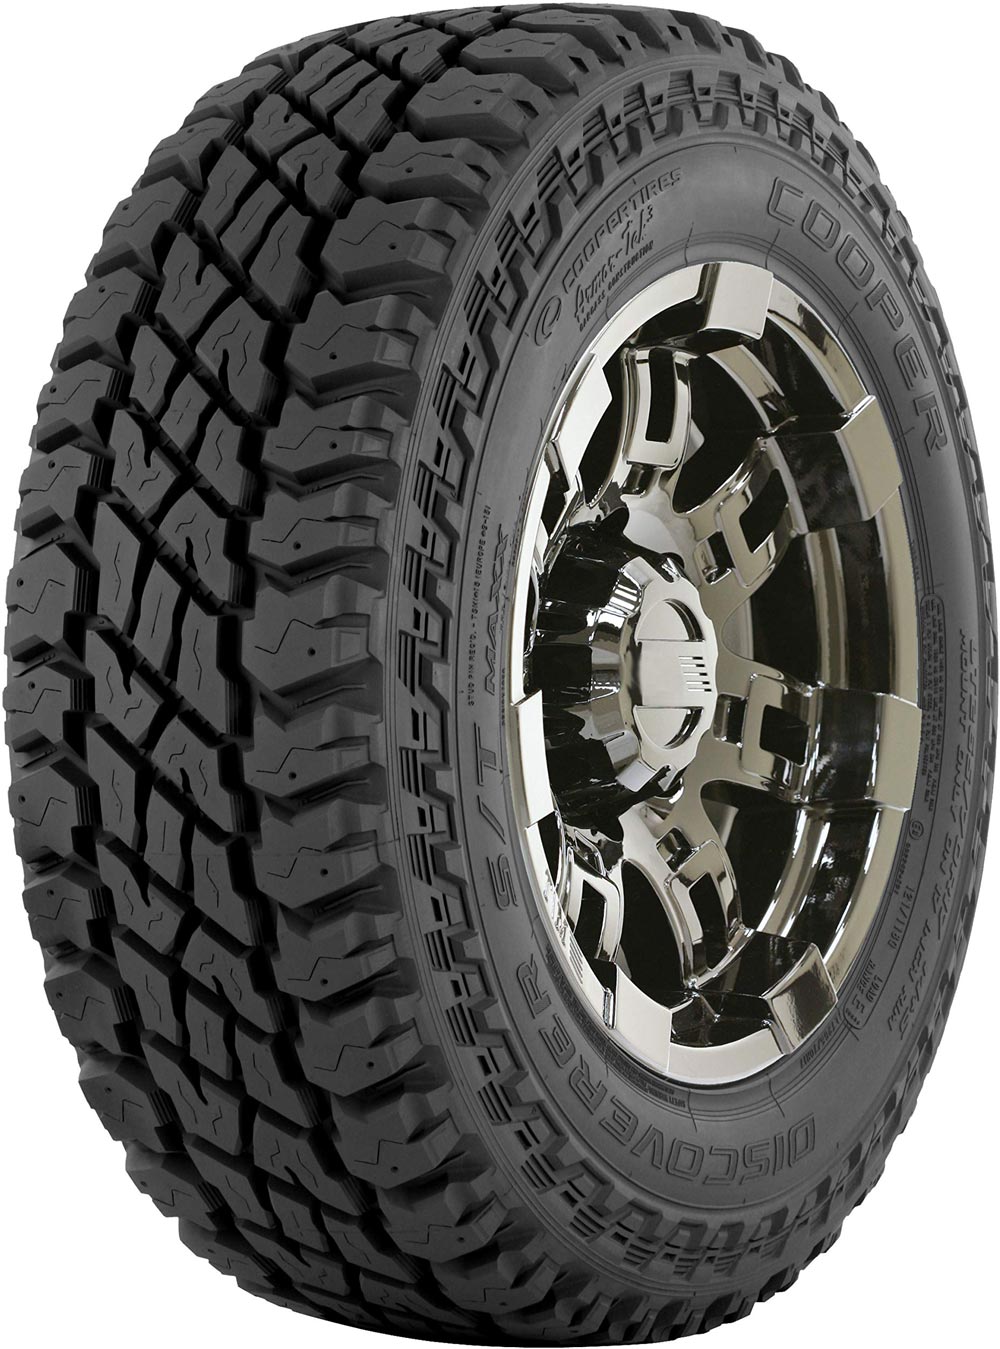 COOPER DISCOVERER ST MAXX P O BSW 245/70 R17 119Q